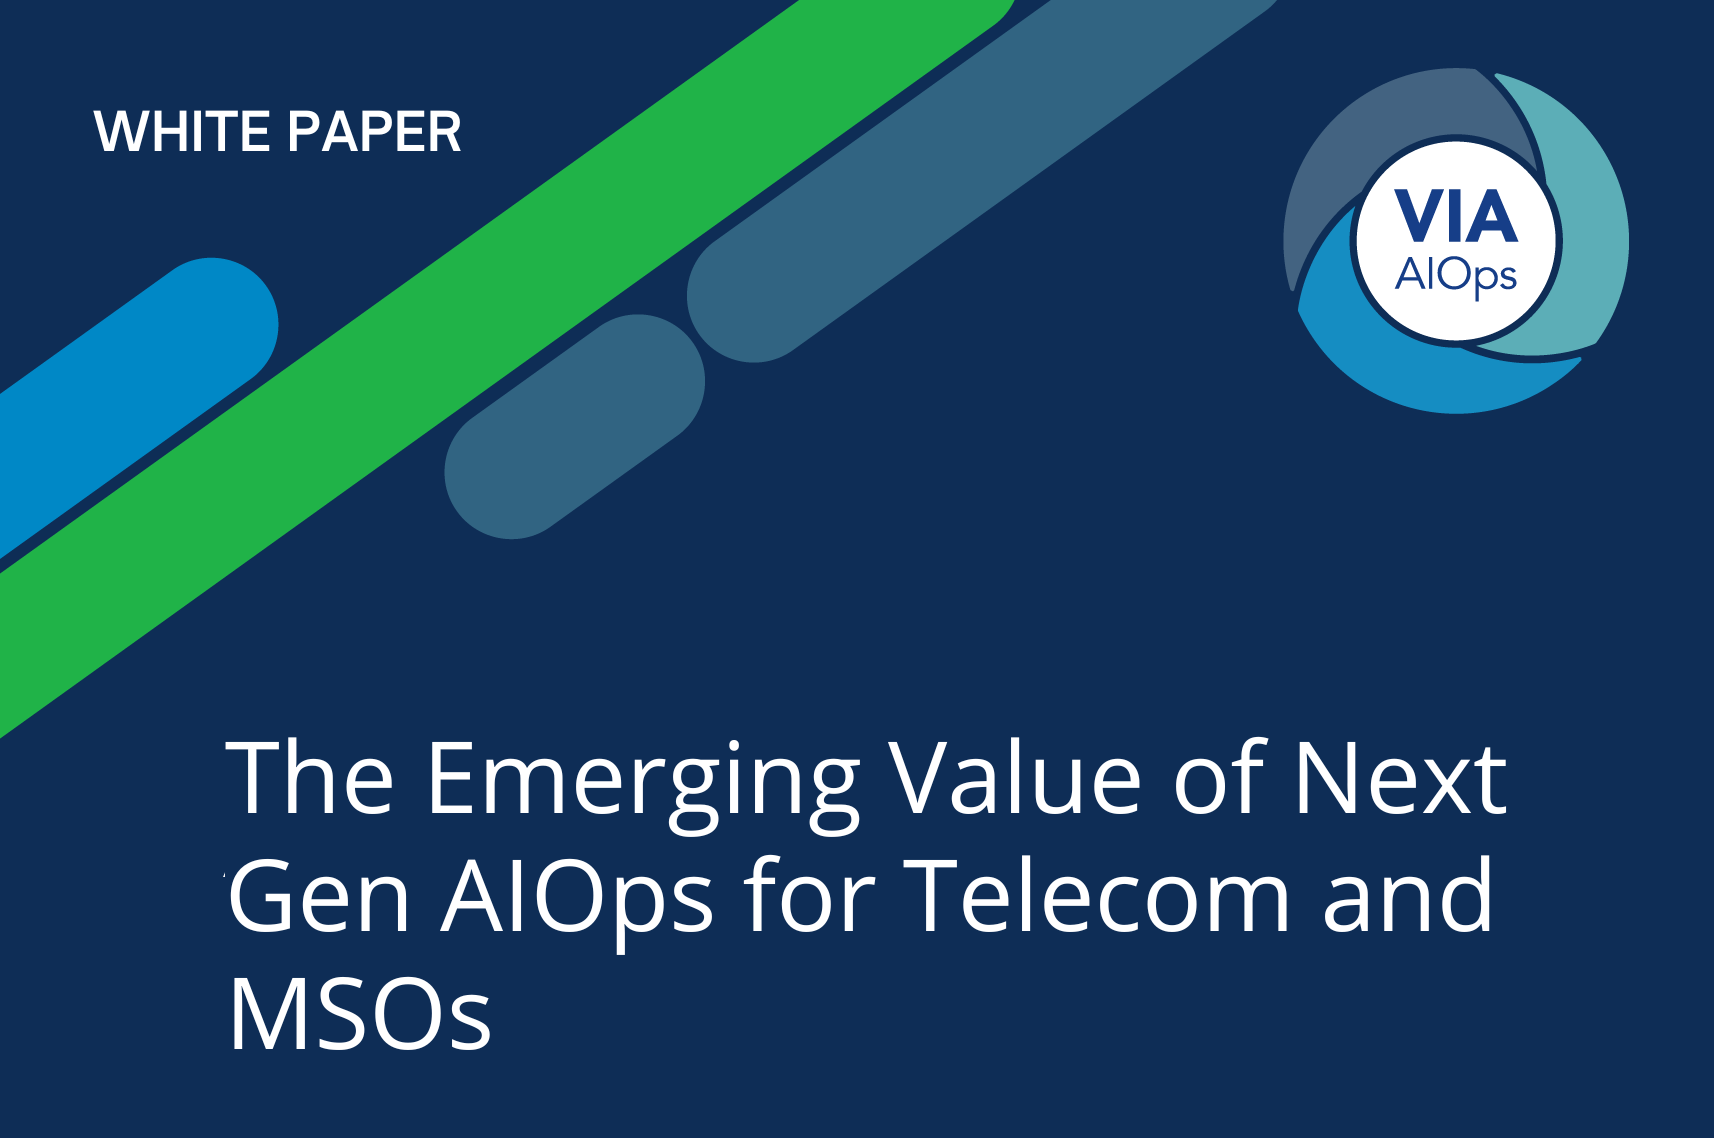 The Emerging Value of Next Gen AIOps for Telecom and MSOs